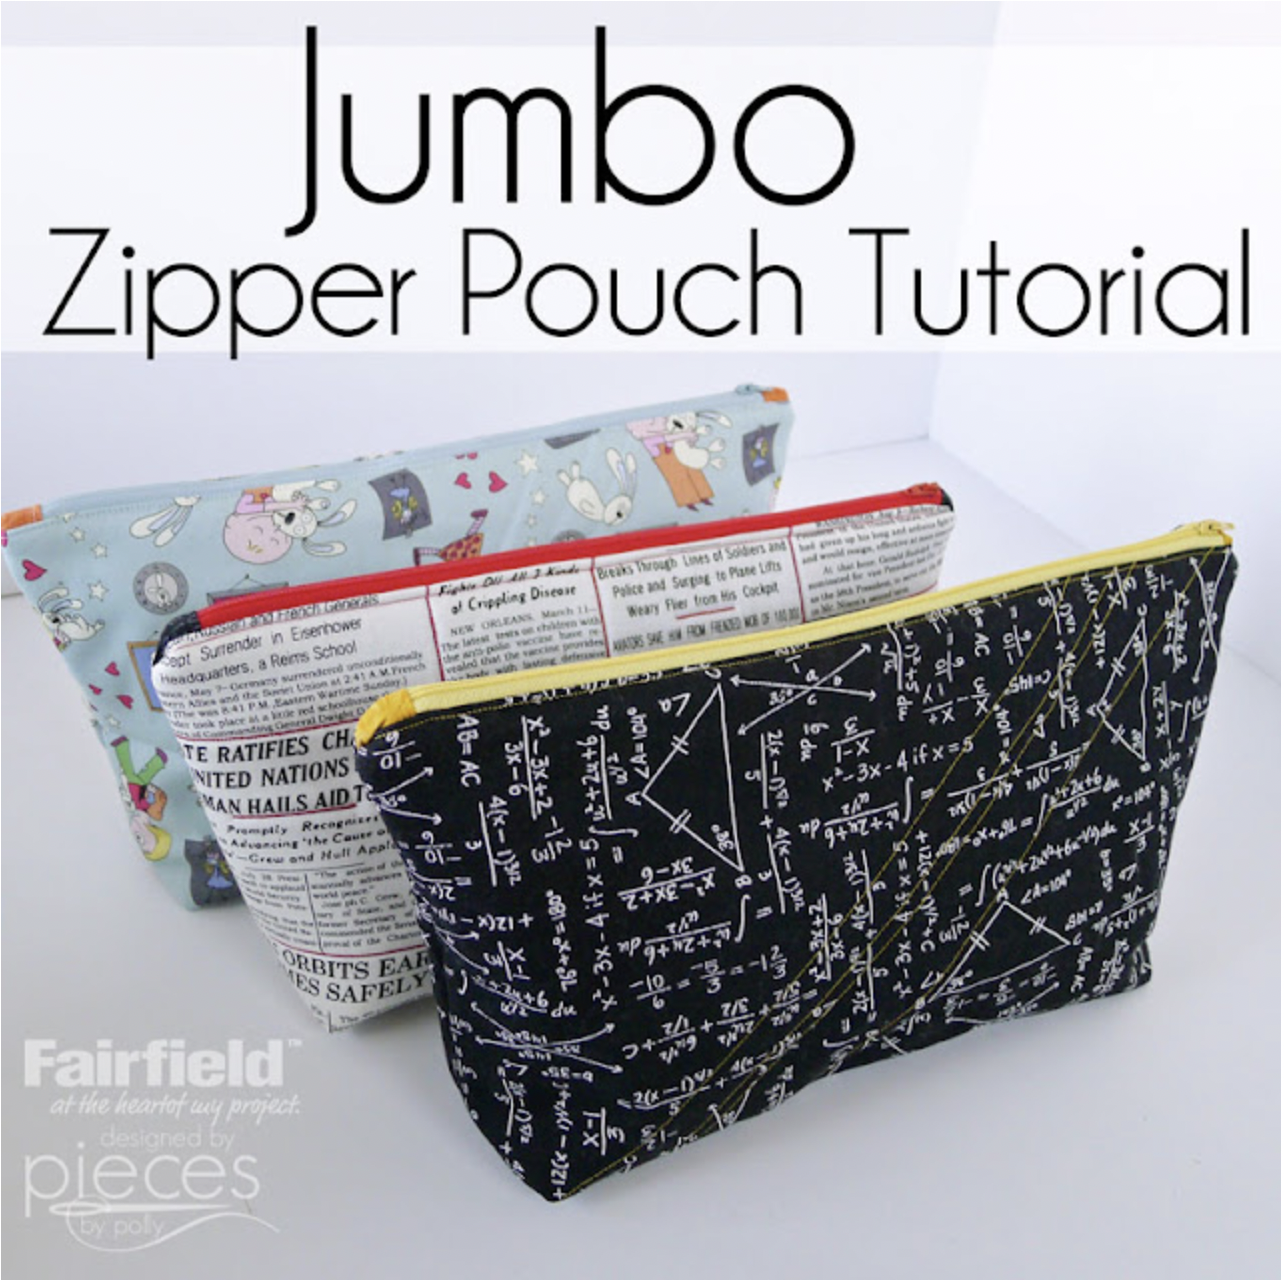 zipper pouch graduation gifts to sew